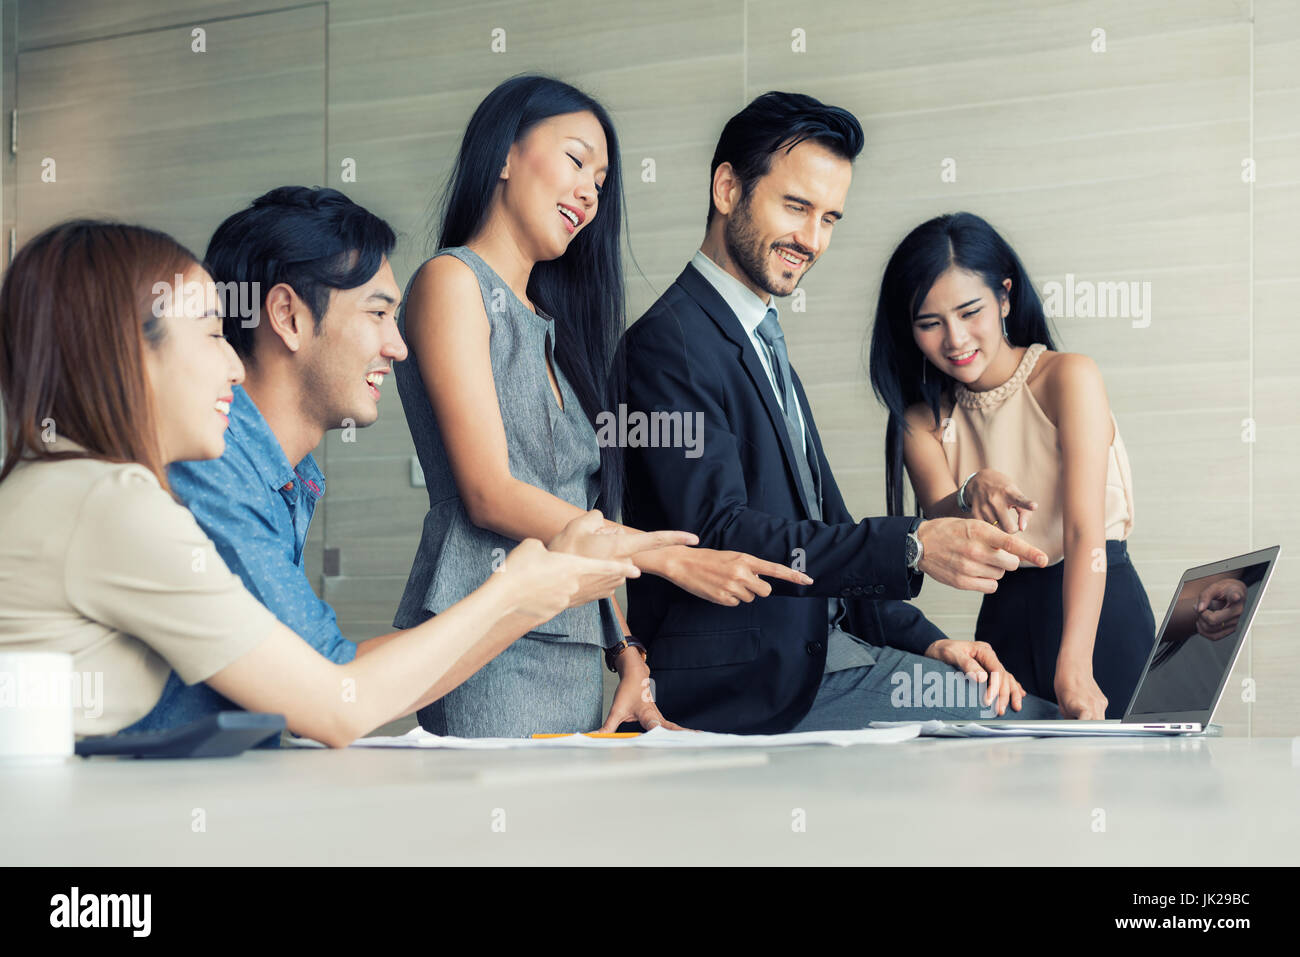 Group of multi-ethnic business partners creative project during work process. Business meeting discussion startup concept office. Stock Photo